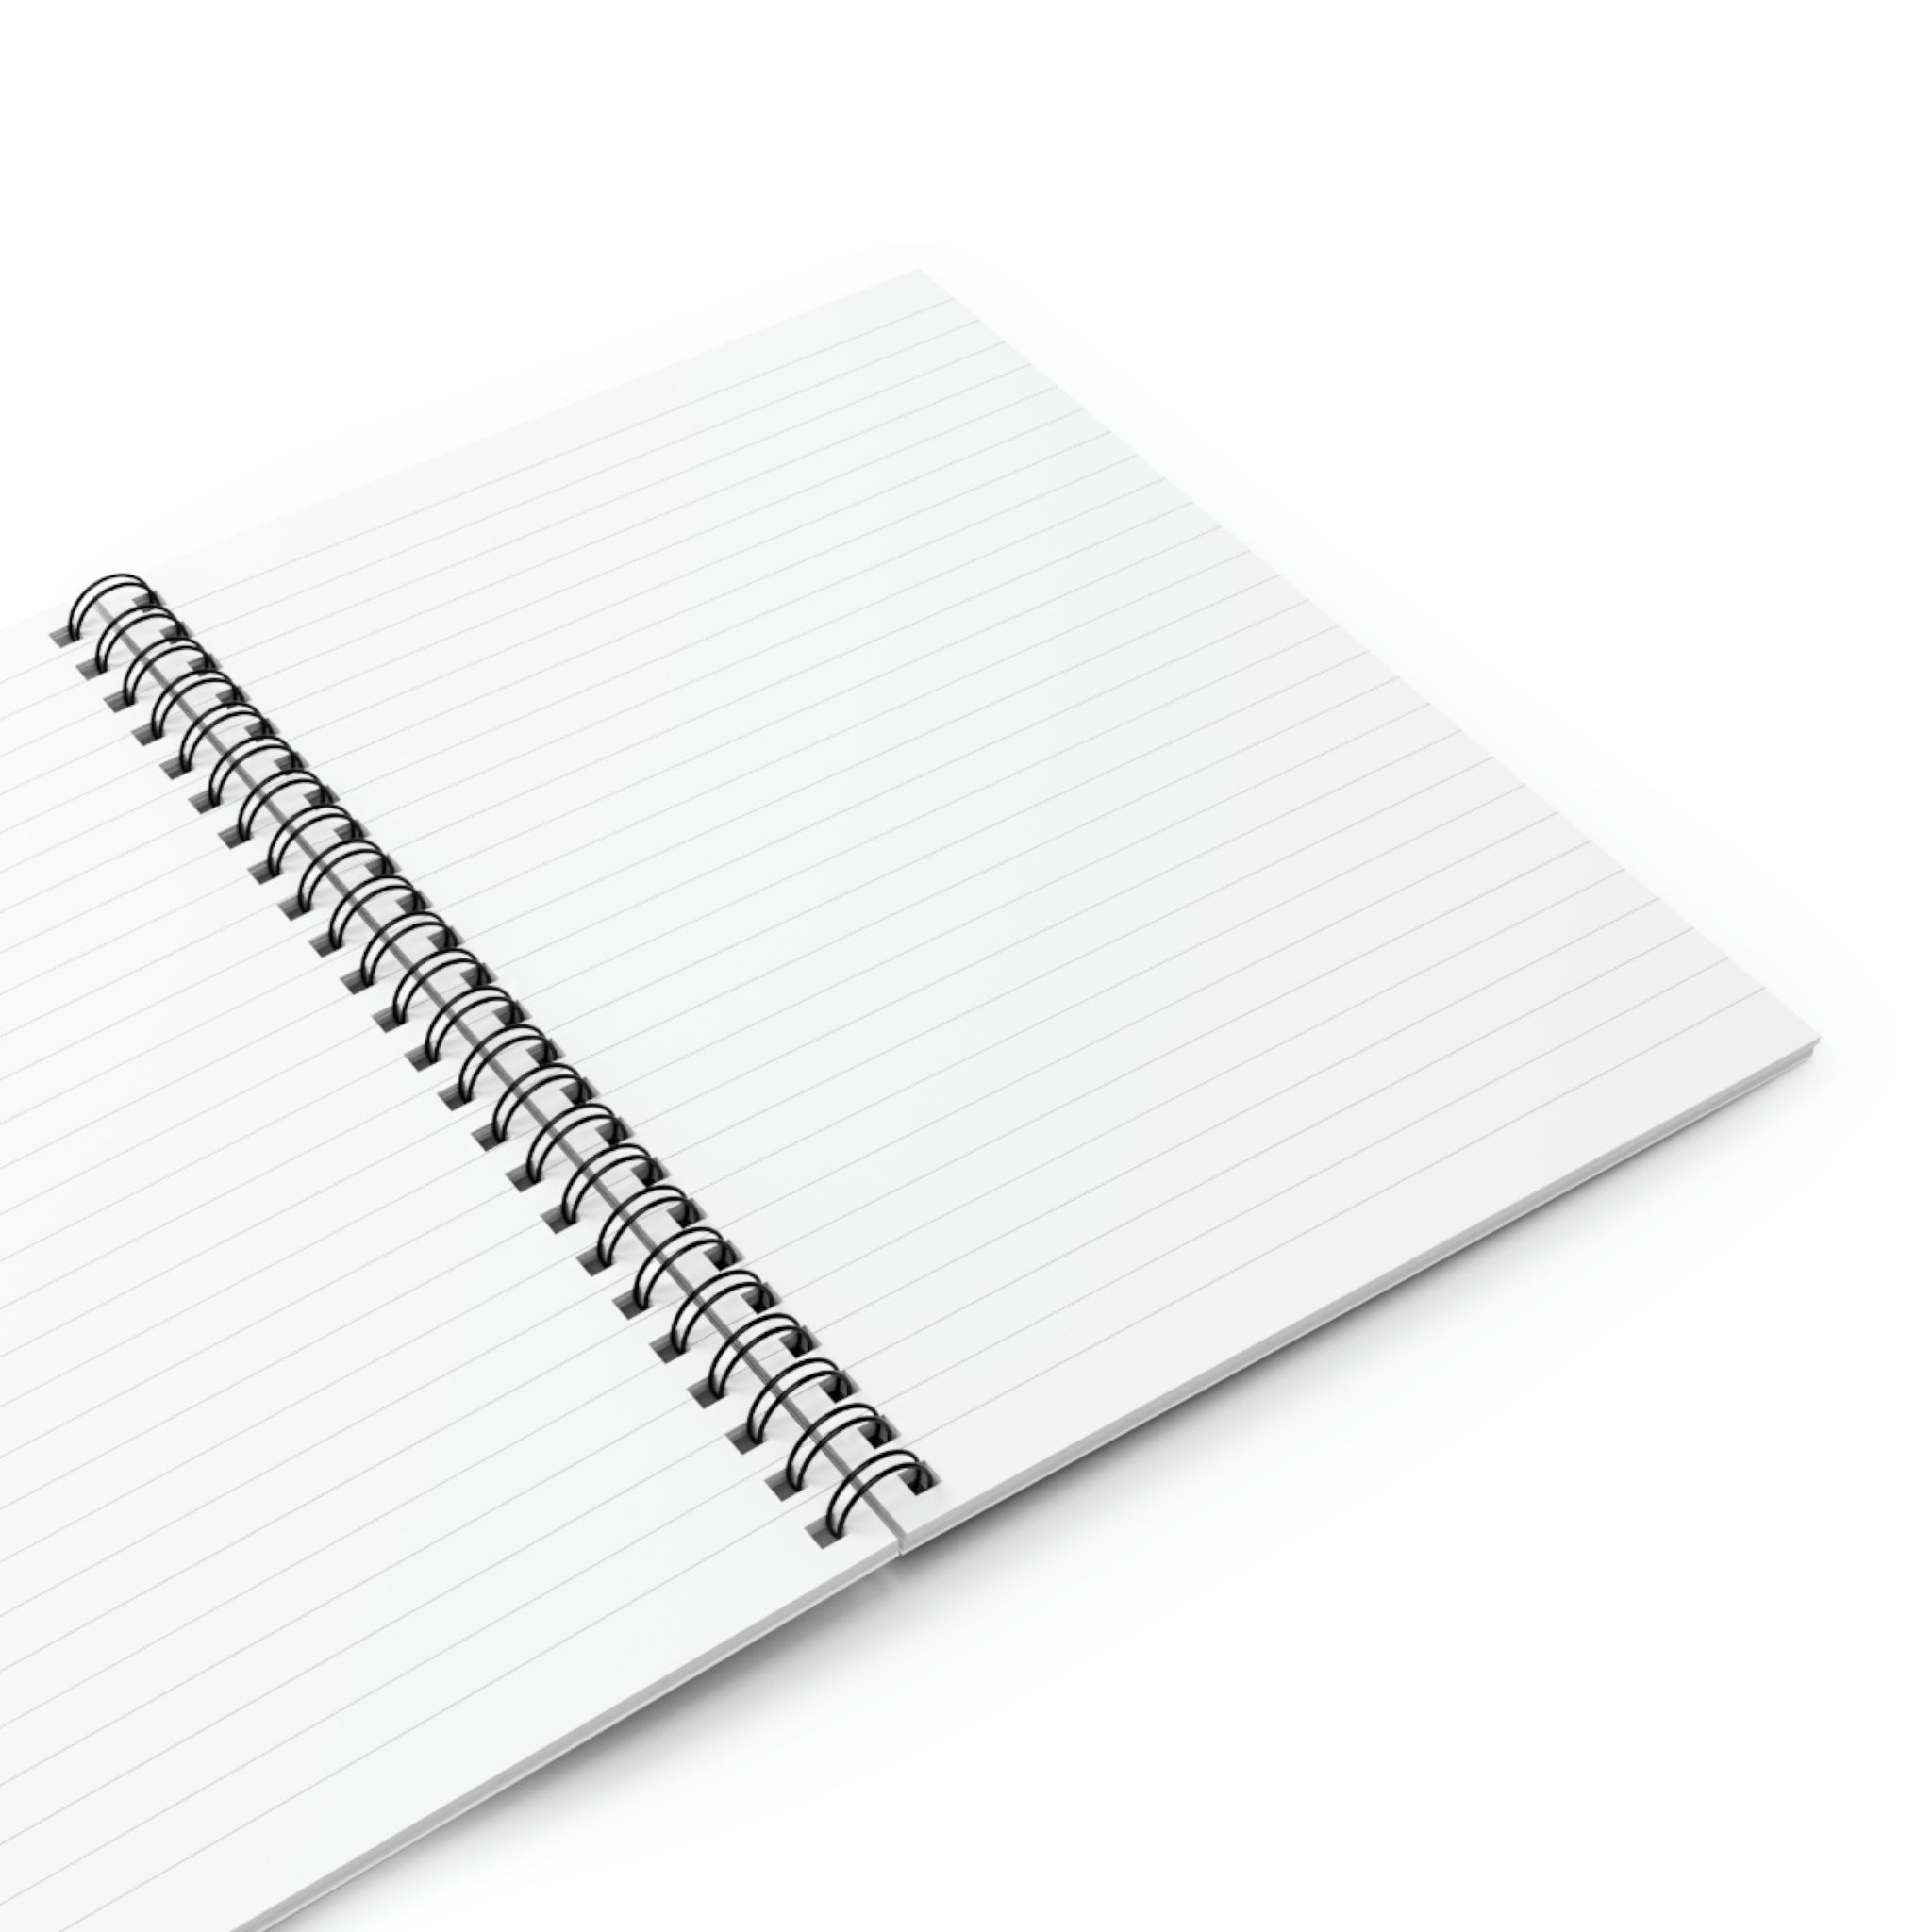 Daisy Spiral Notebook - Ruled Line